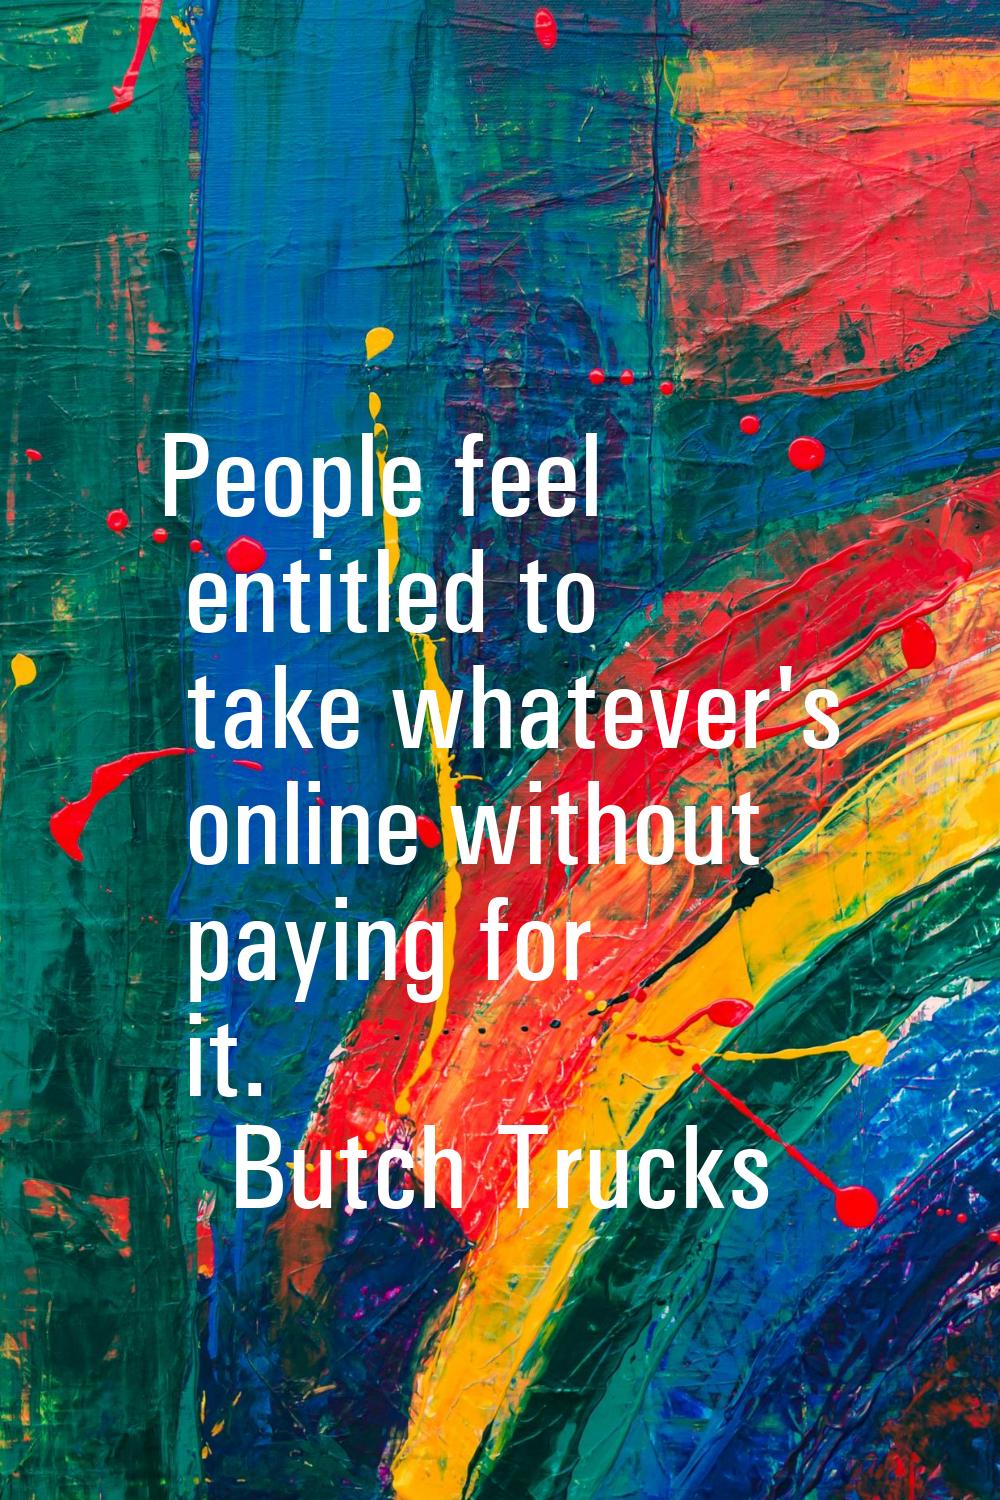 People feel entitled to take whatever's online without paying for it.